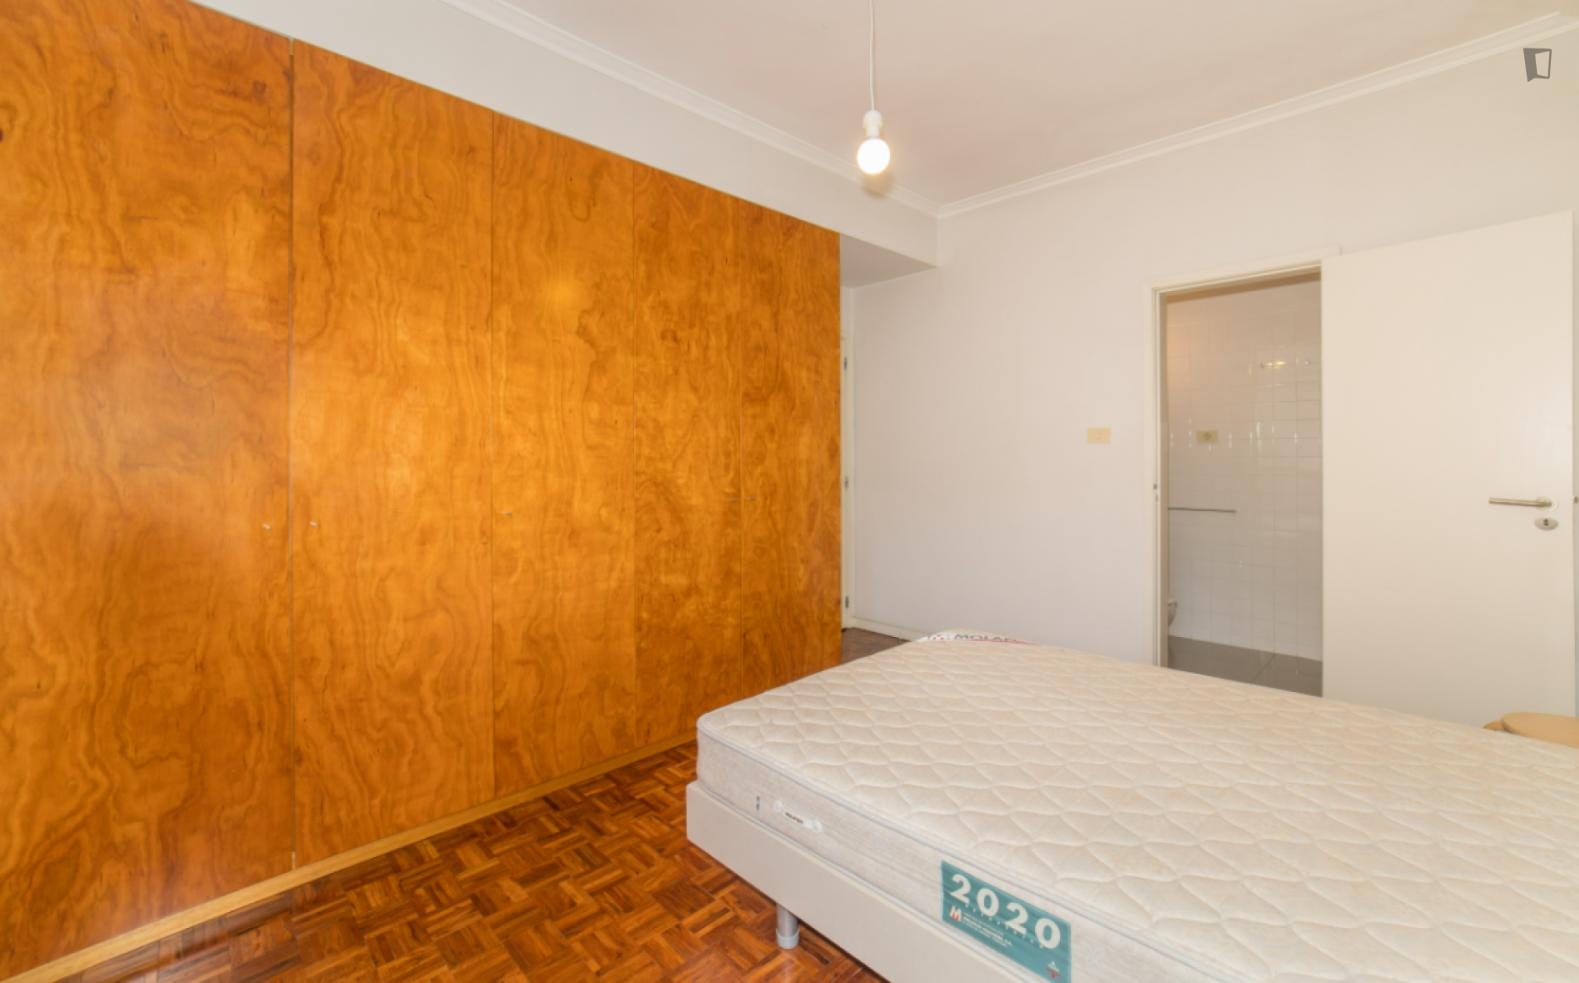 Single bedroom close to Faculty of Economics, University of Coimbra